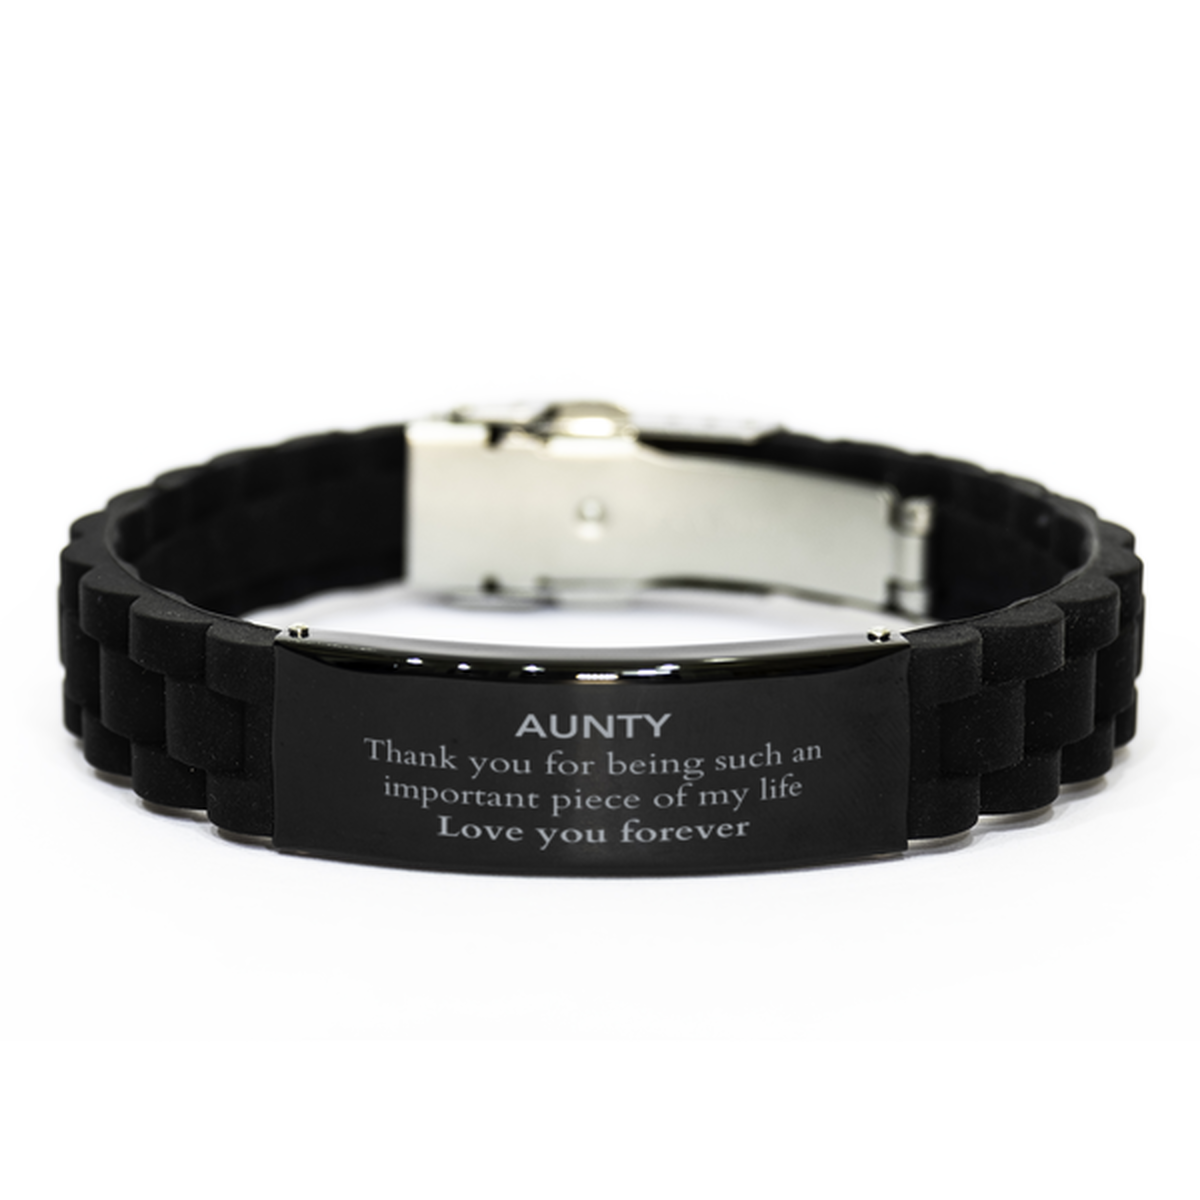 Appropriate Aunty Black Glidelock Clasp Bracelet Epic Birthday Gifts for Aunty Thank you for being such an important piece of my life Aunty Christmas Mothers Fathers Day